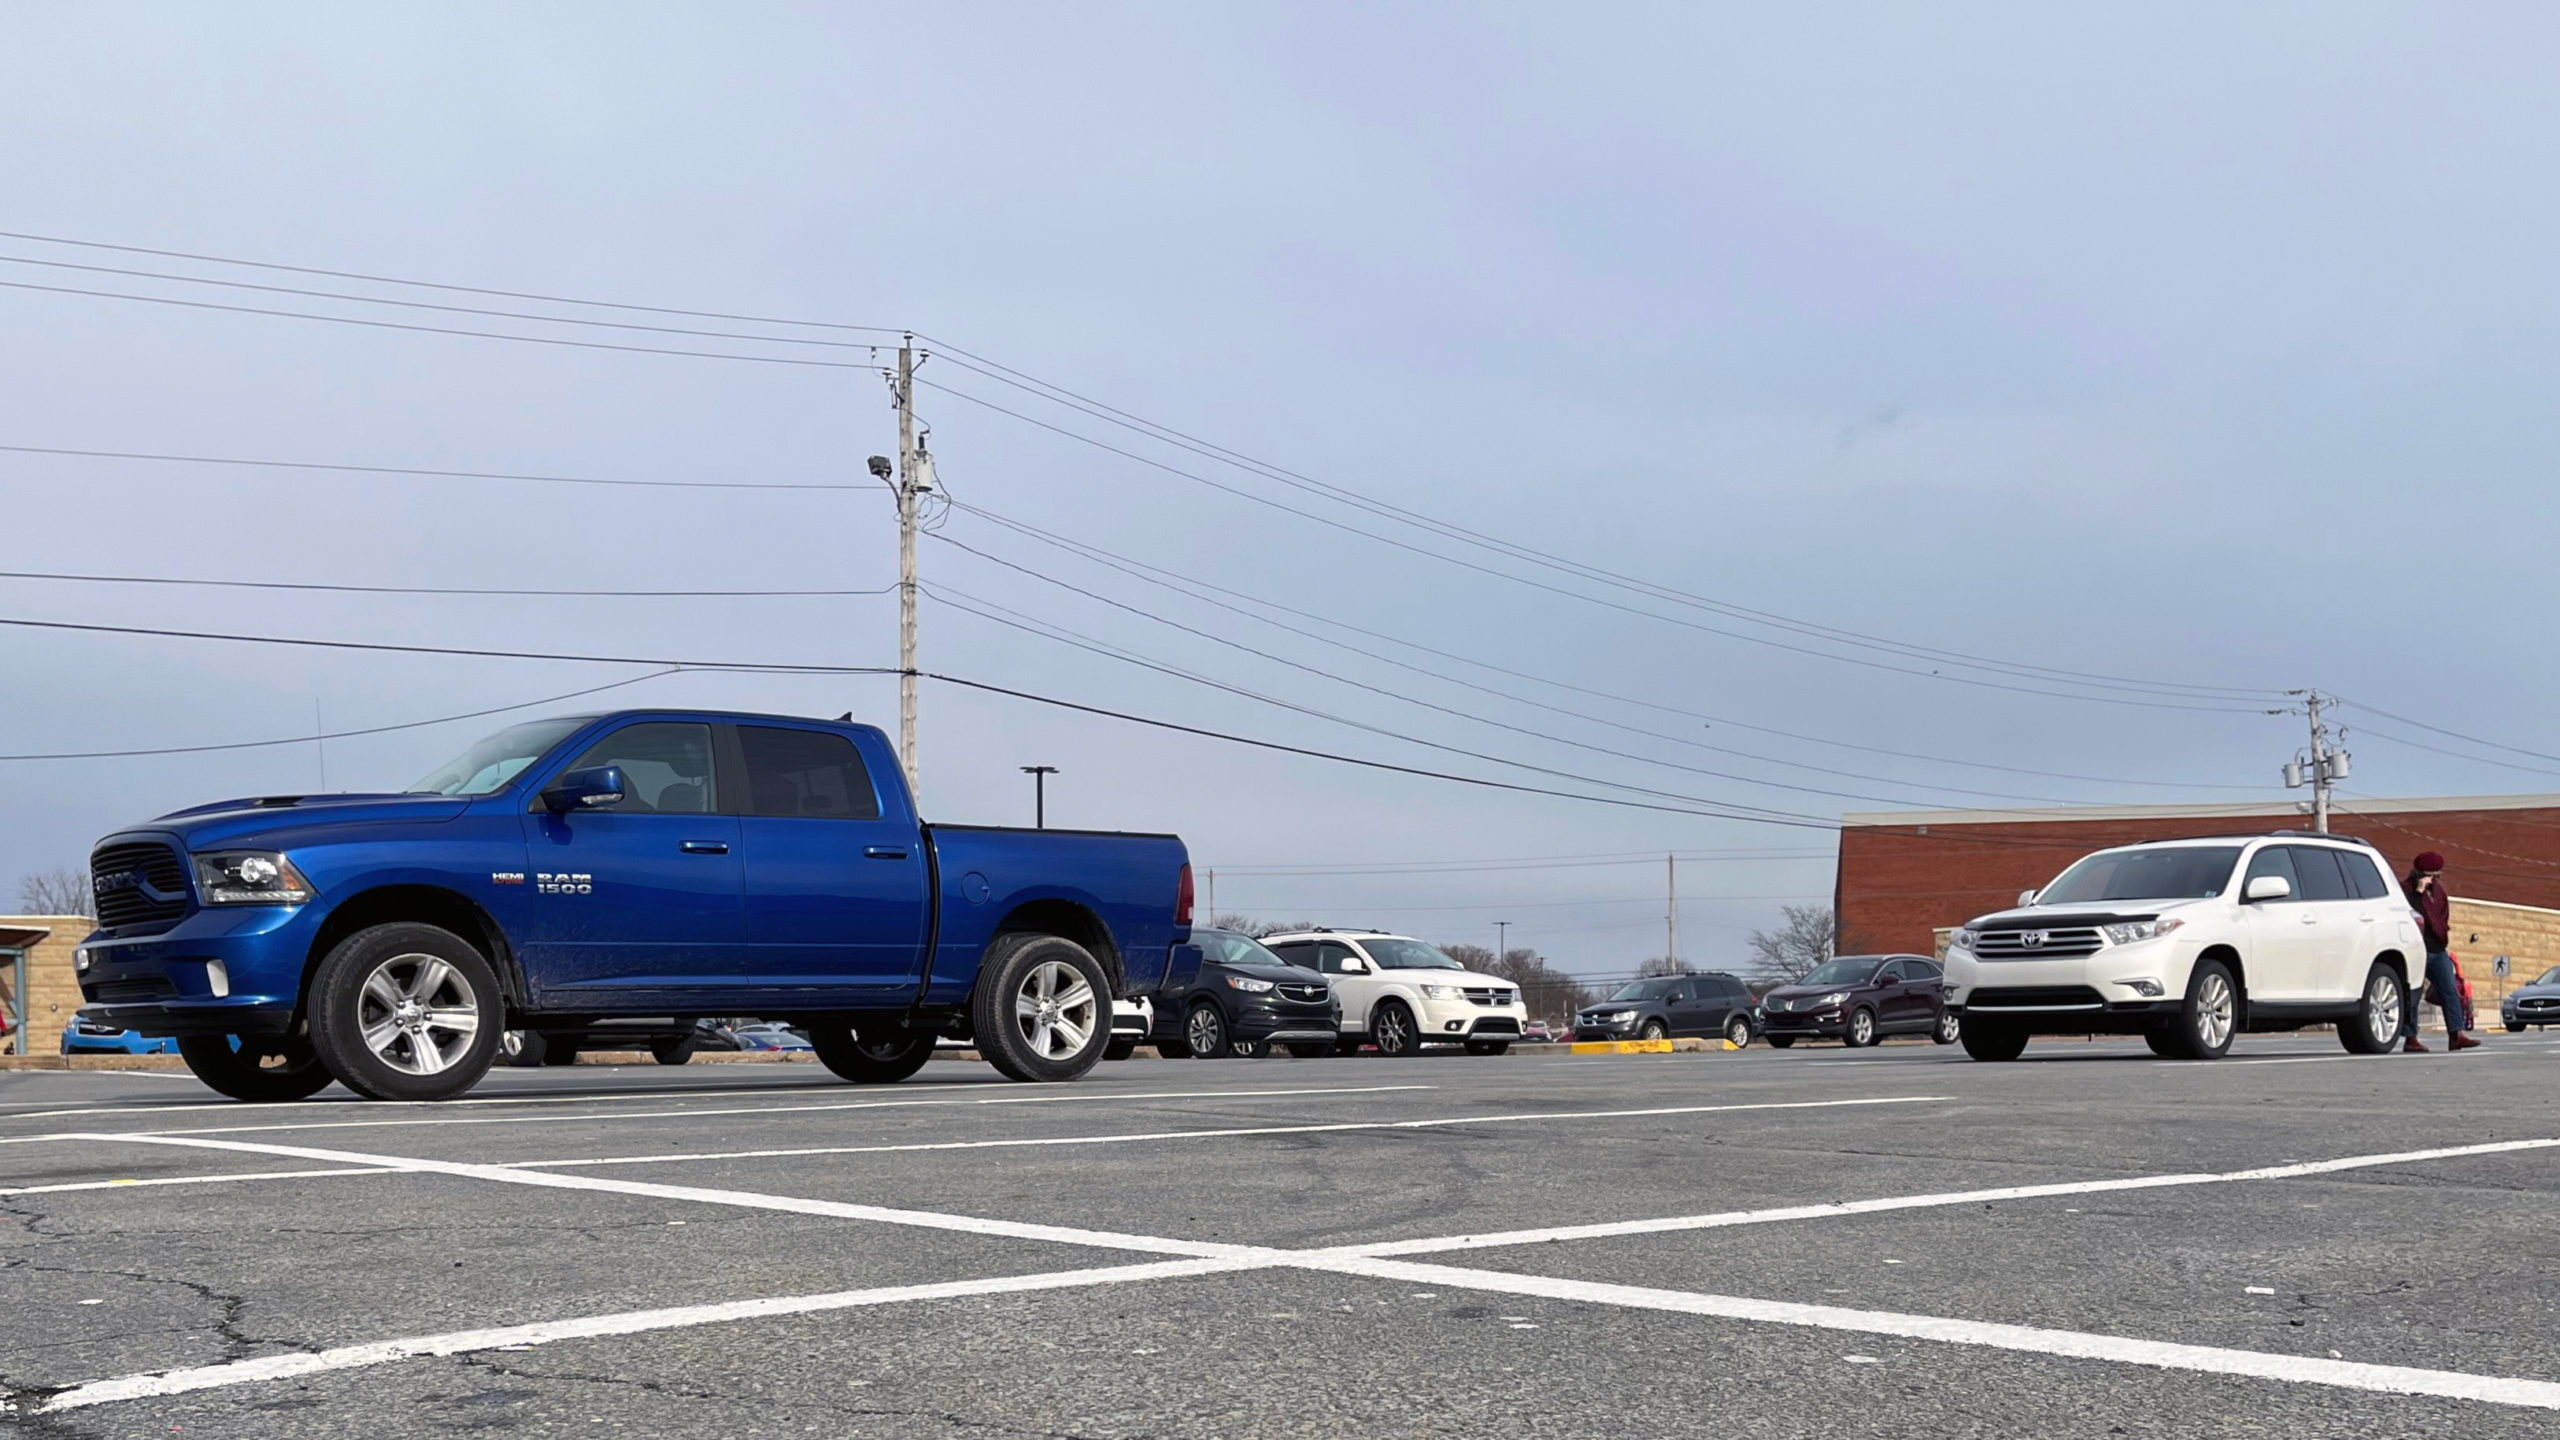 Many Nova Scotians still drive large vehicles, despite warnings that they are heavy polluters and contribute to climate change.